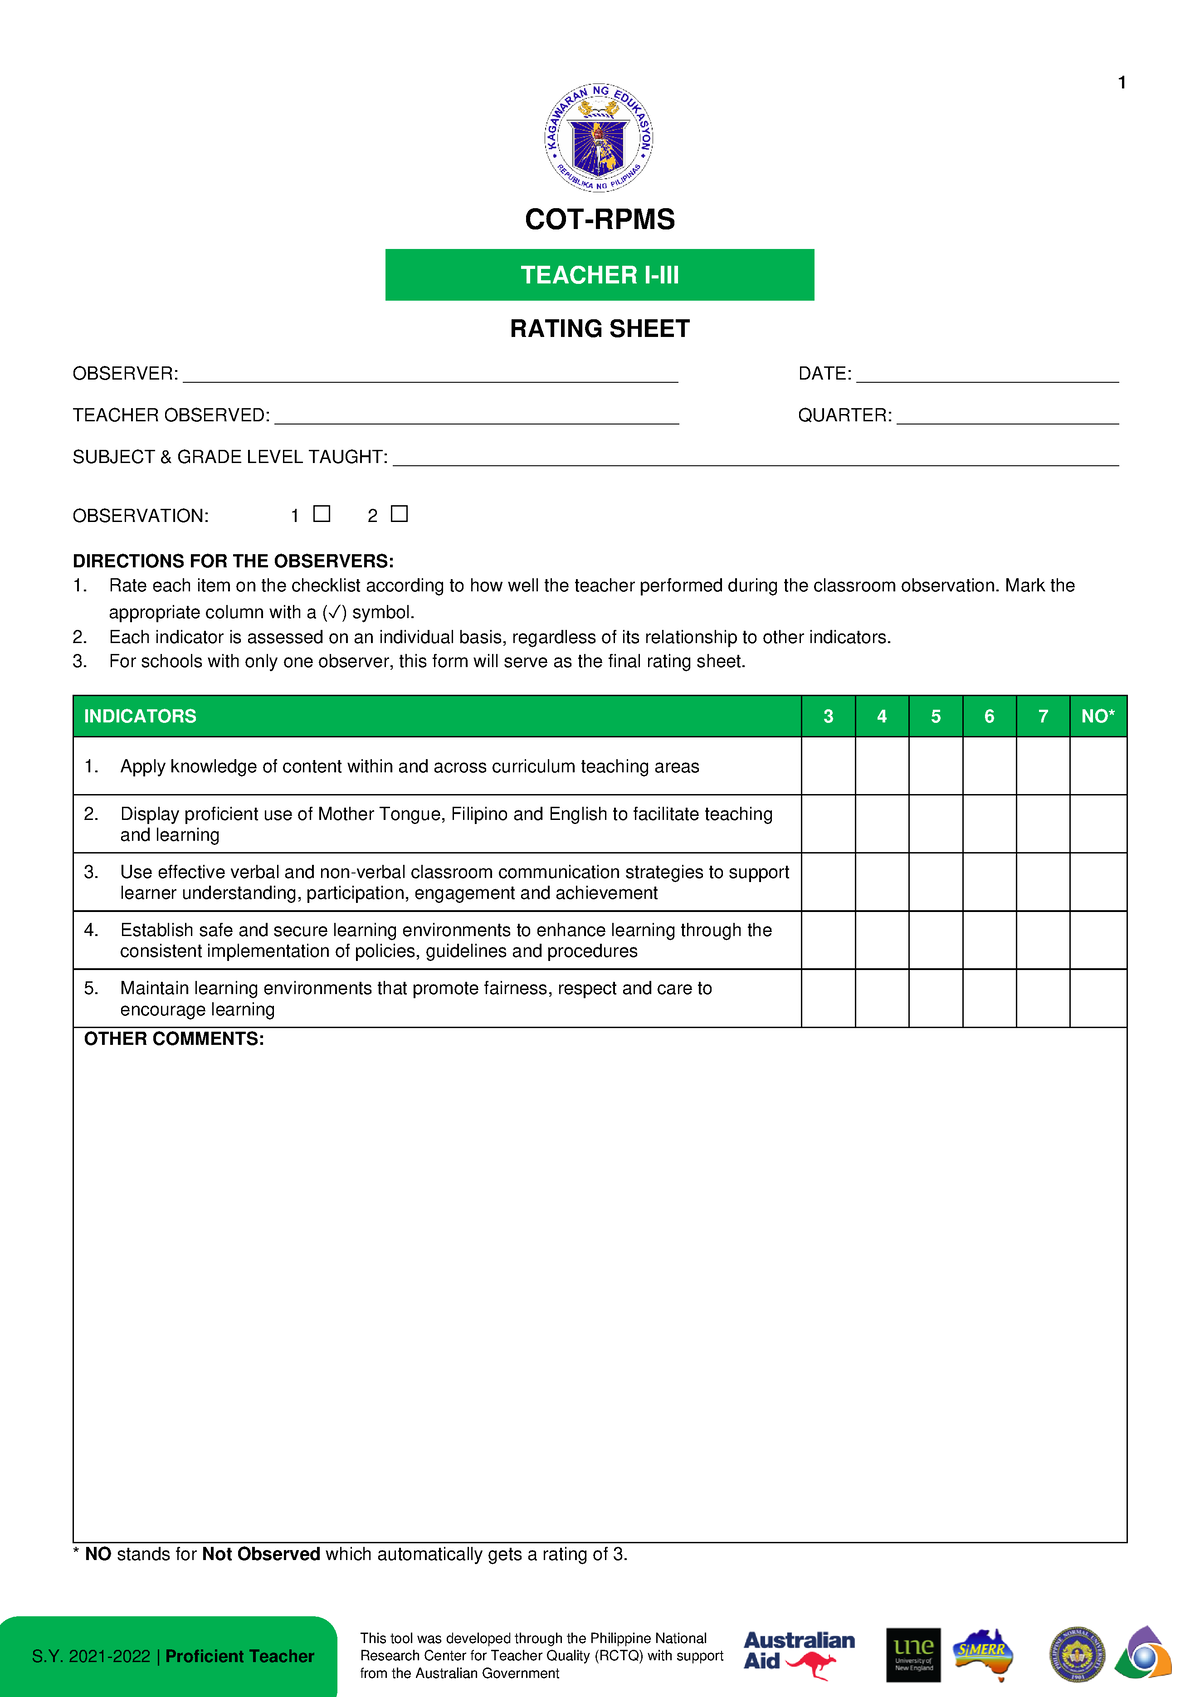 appendix-3c-cot-rpms-rating-sheet-for-t-i-iii-for-sy-2021-2022-in-the